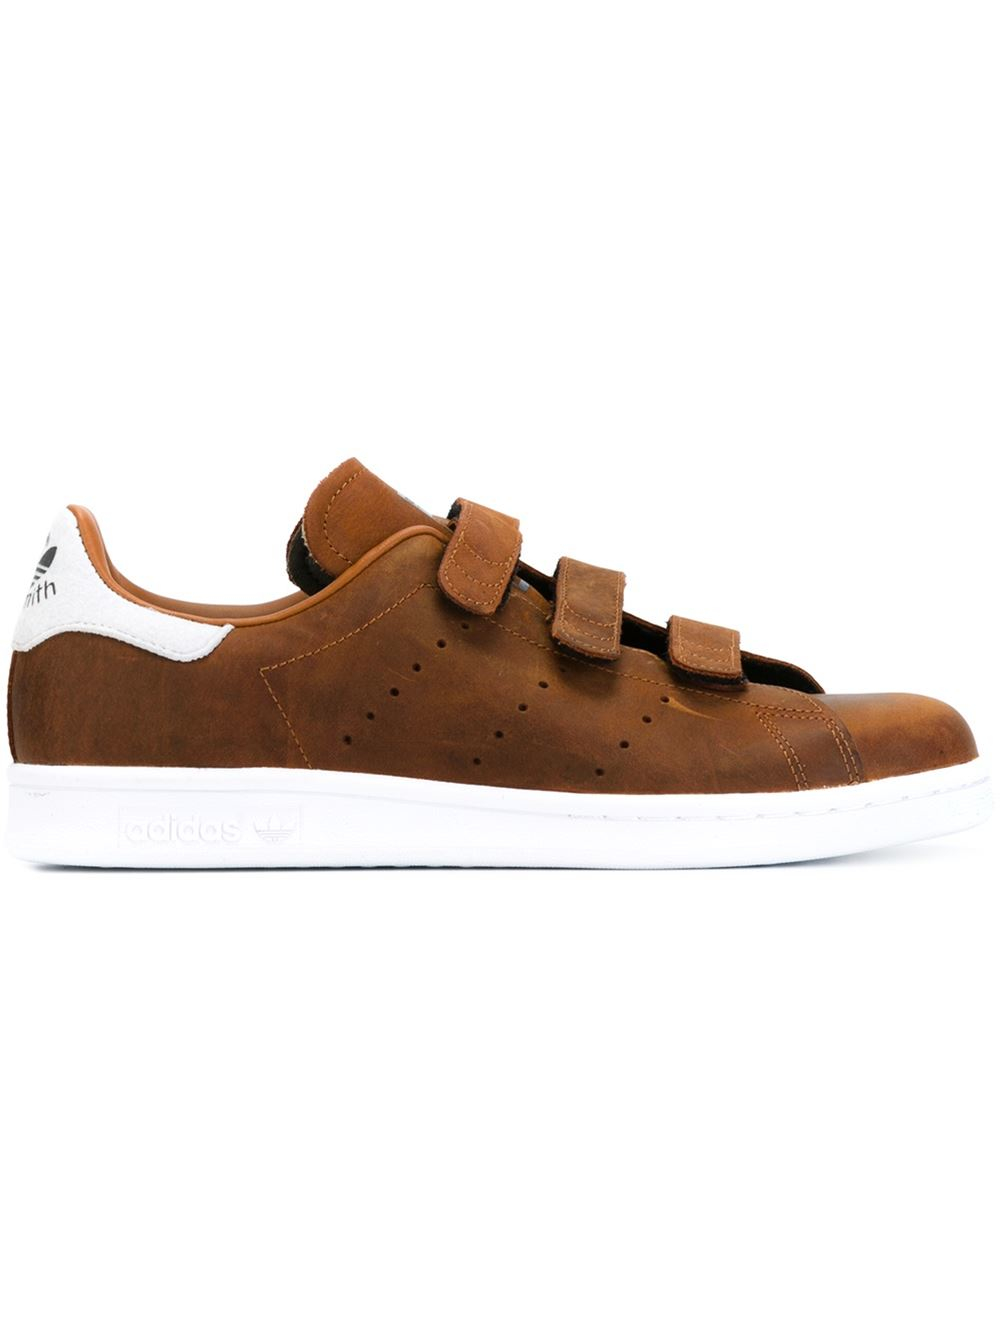 adidas stan smith 2 brown leather